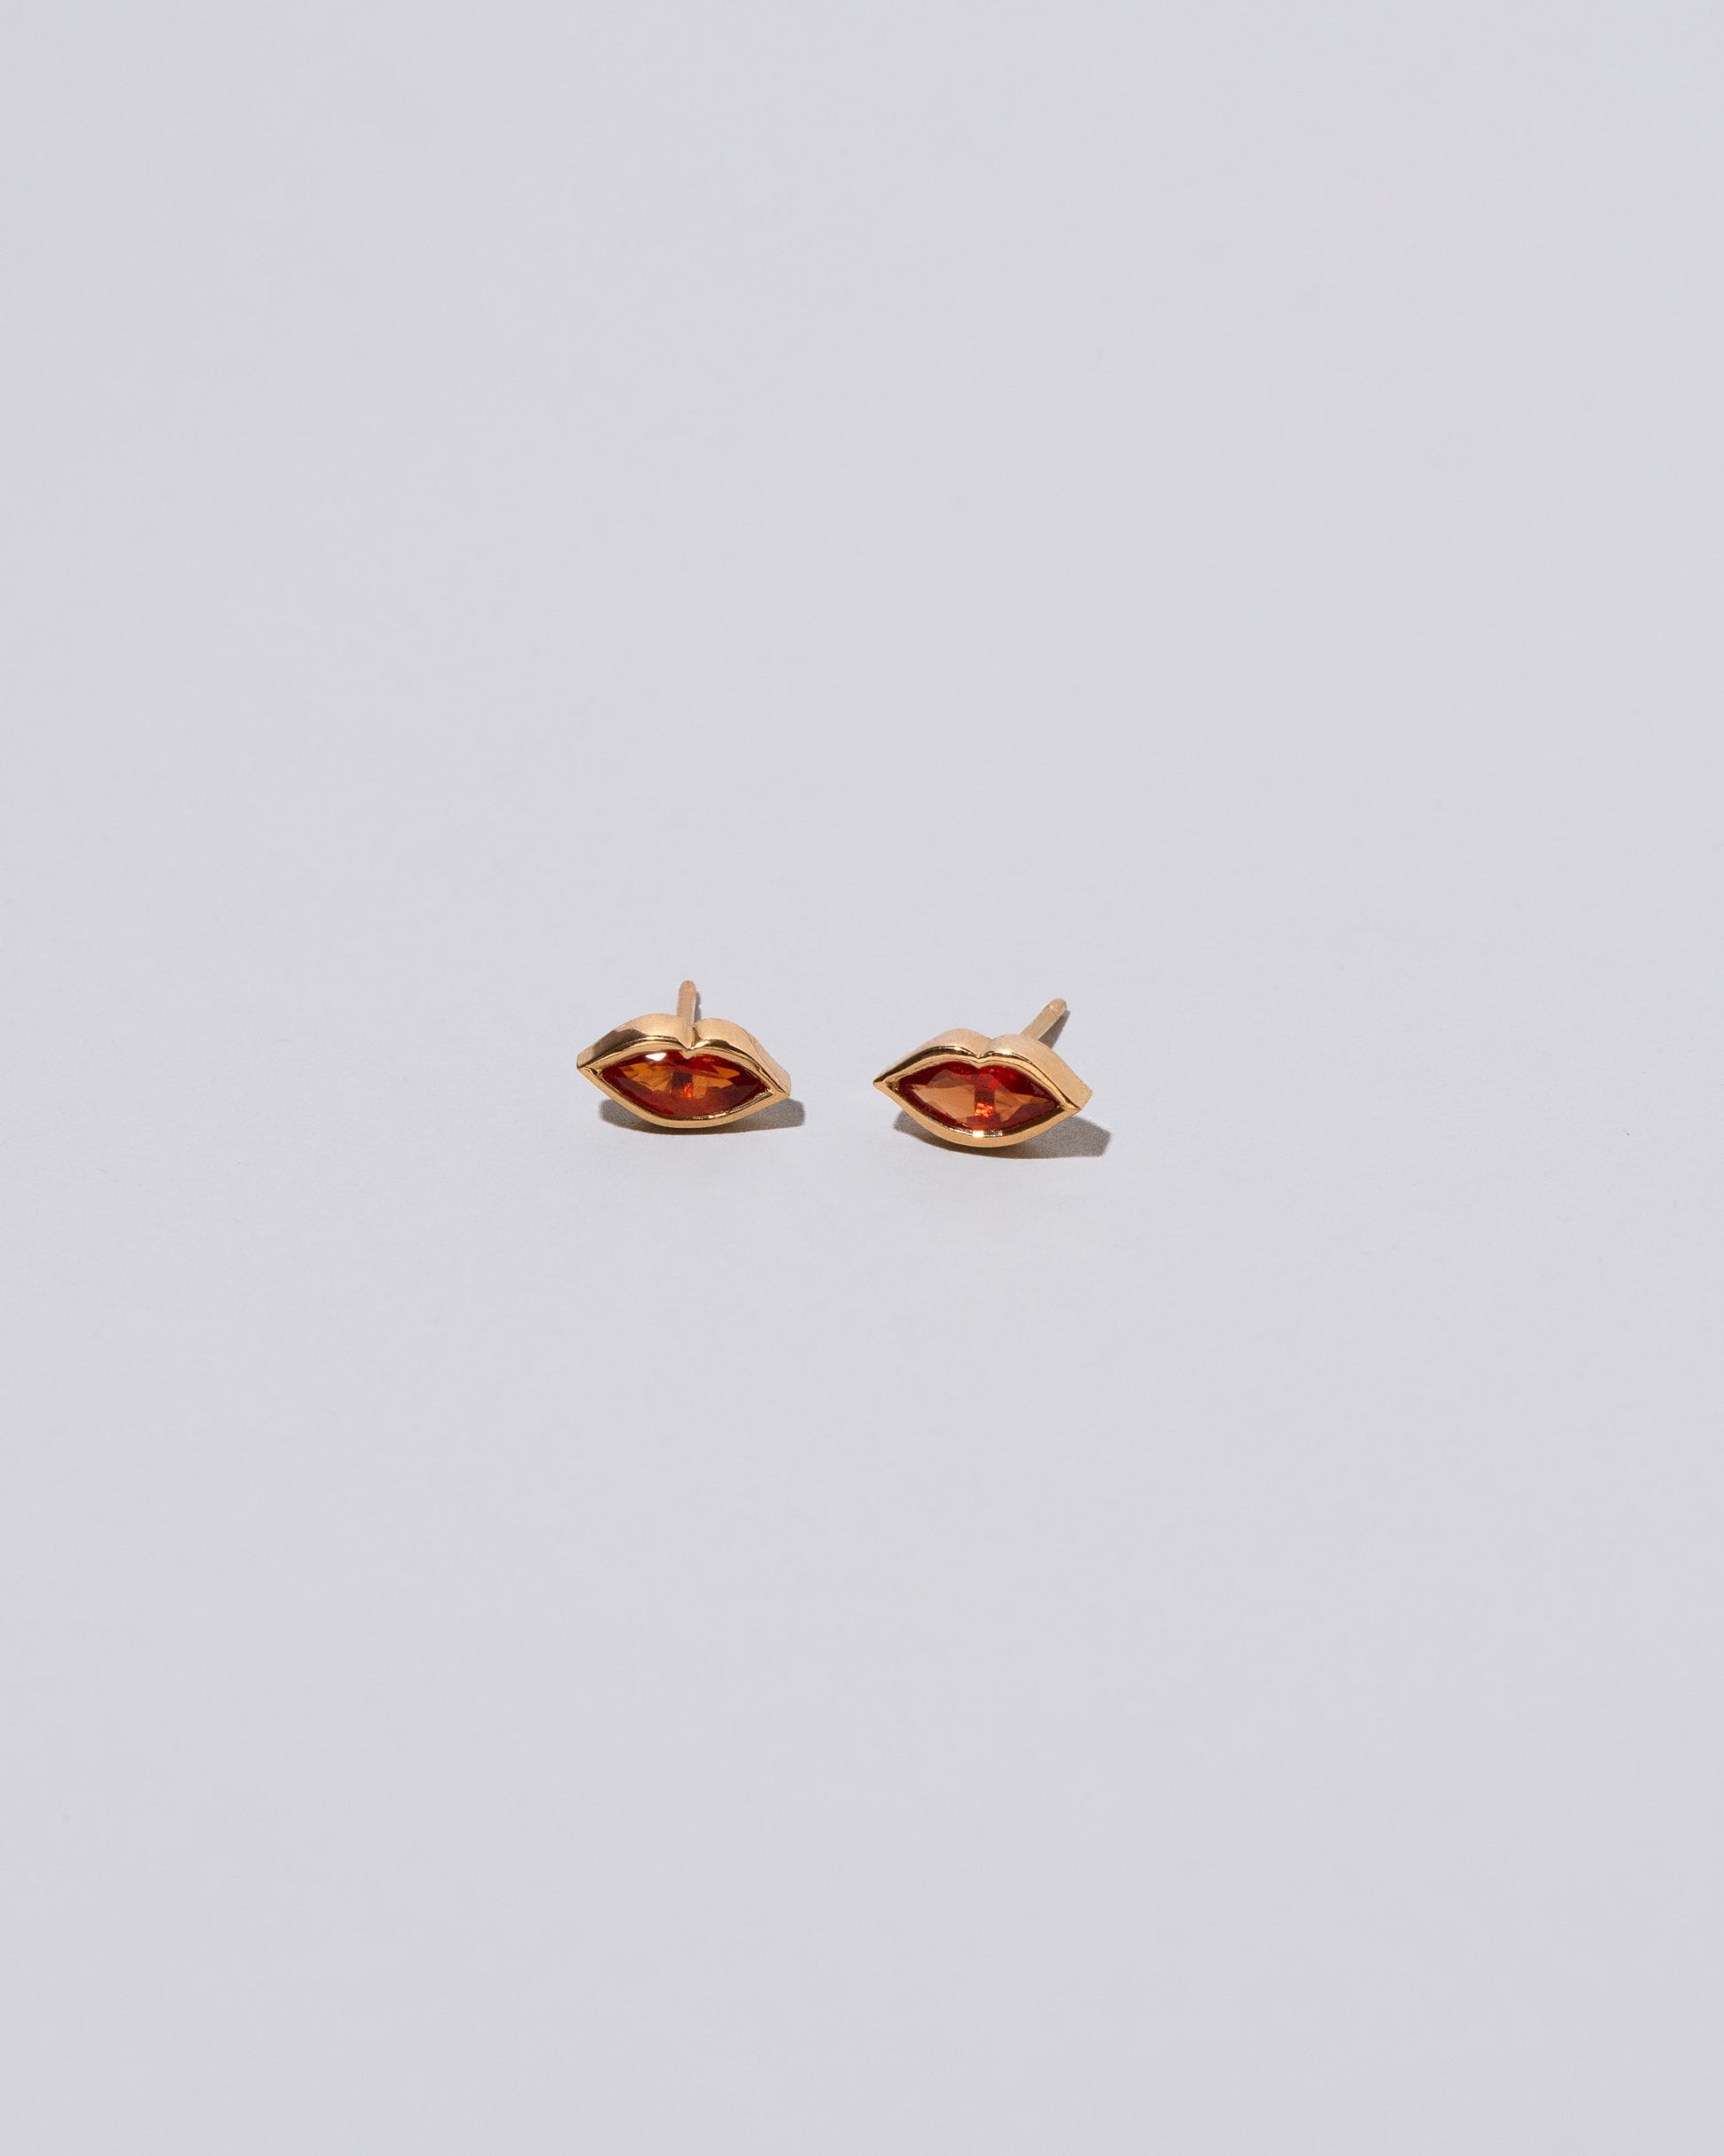 Red Big Kiss Stud Earrings on light color background.